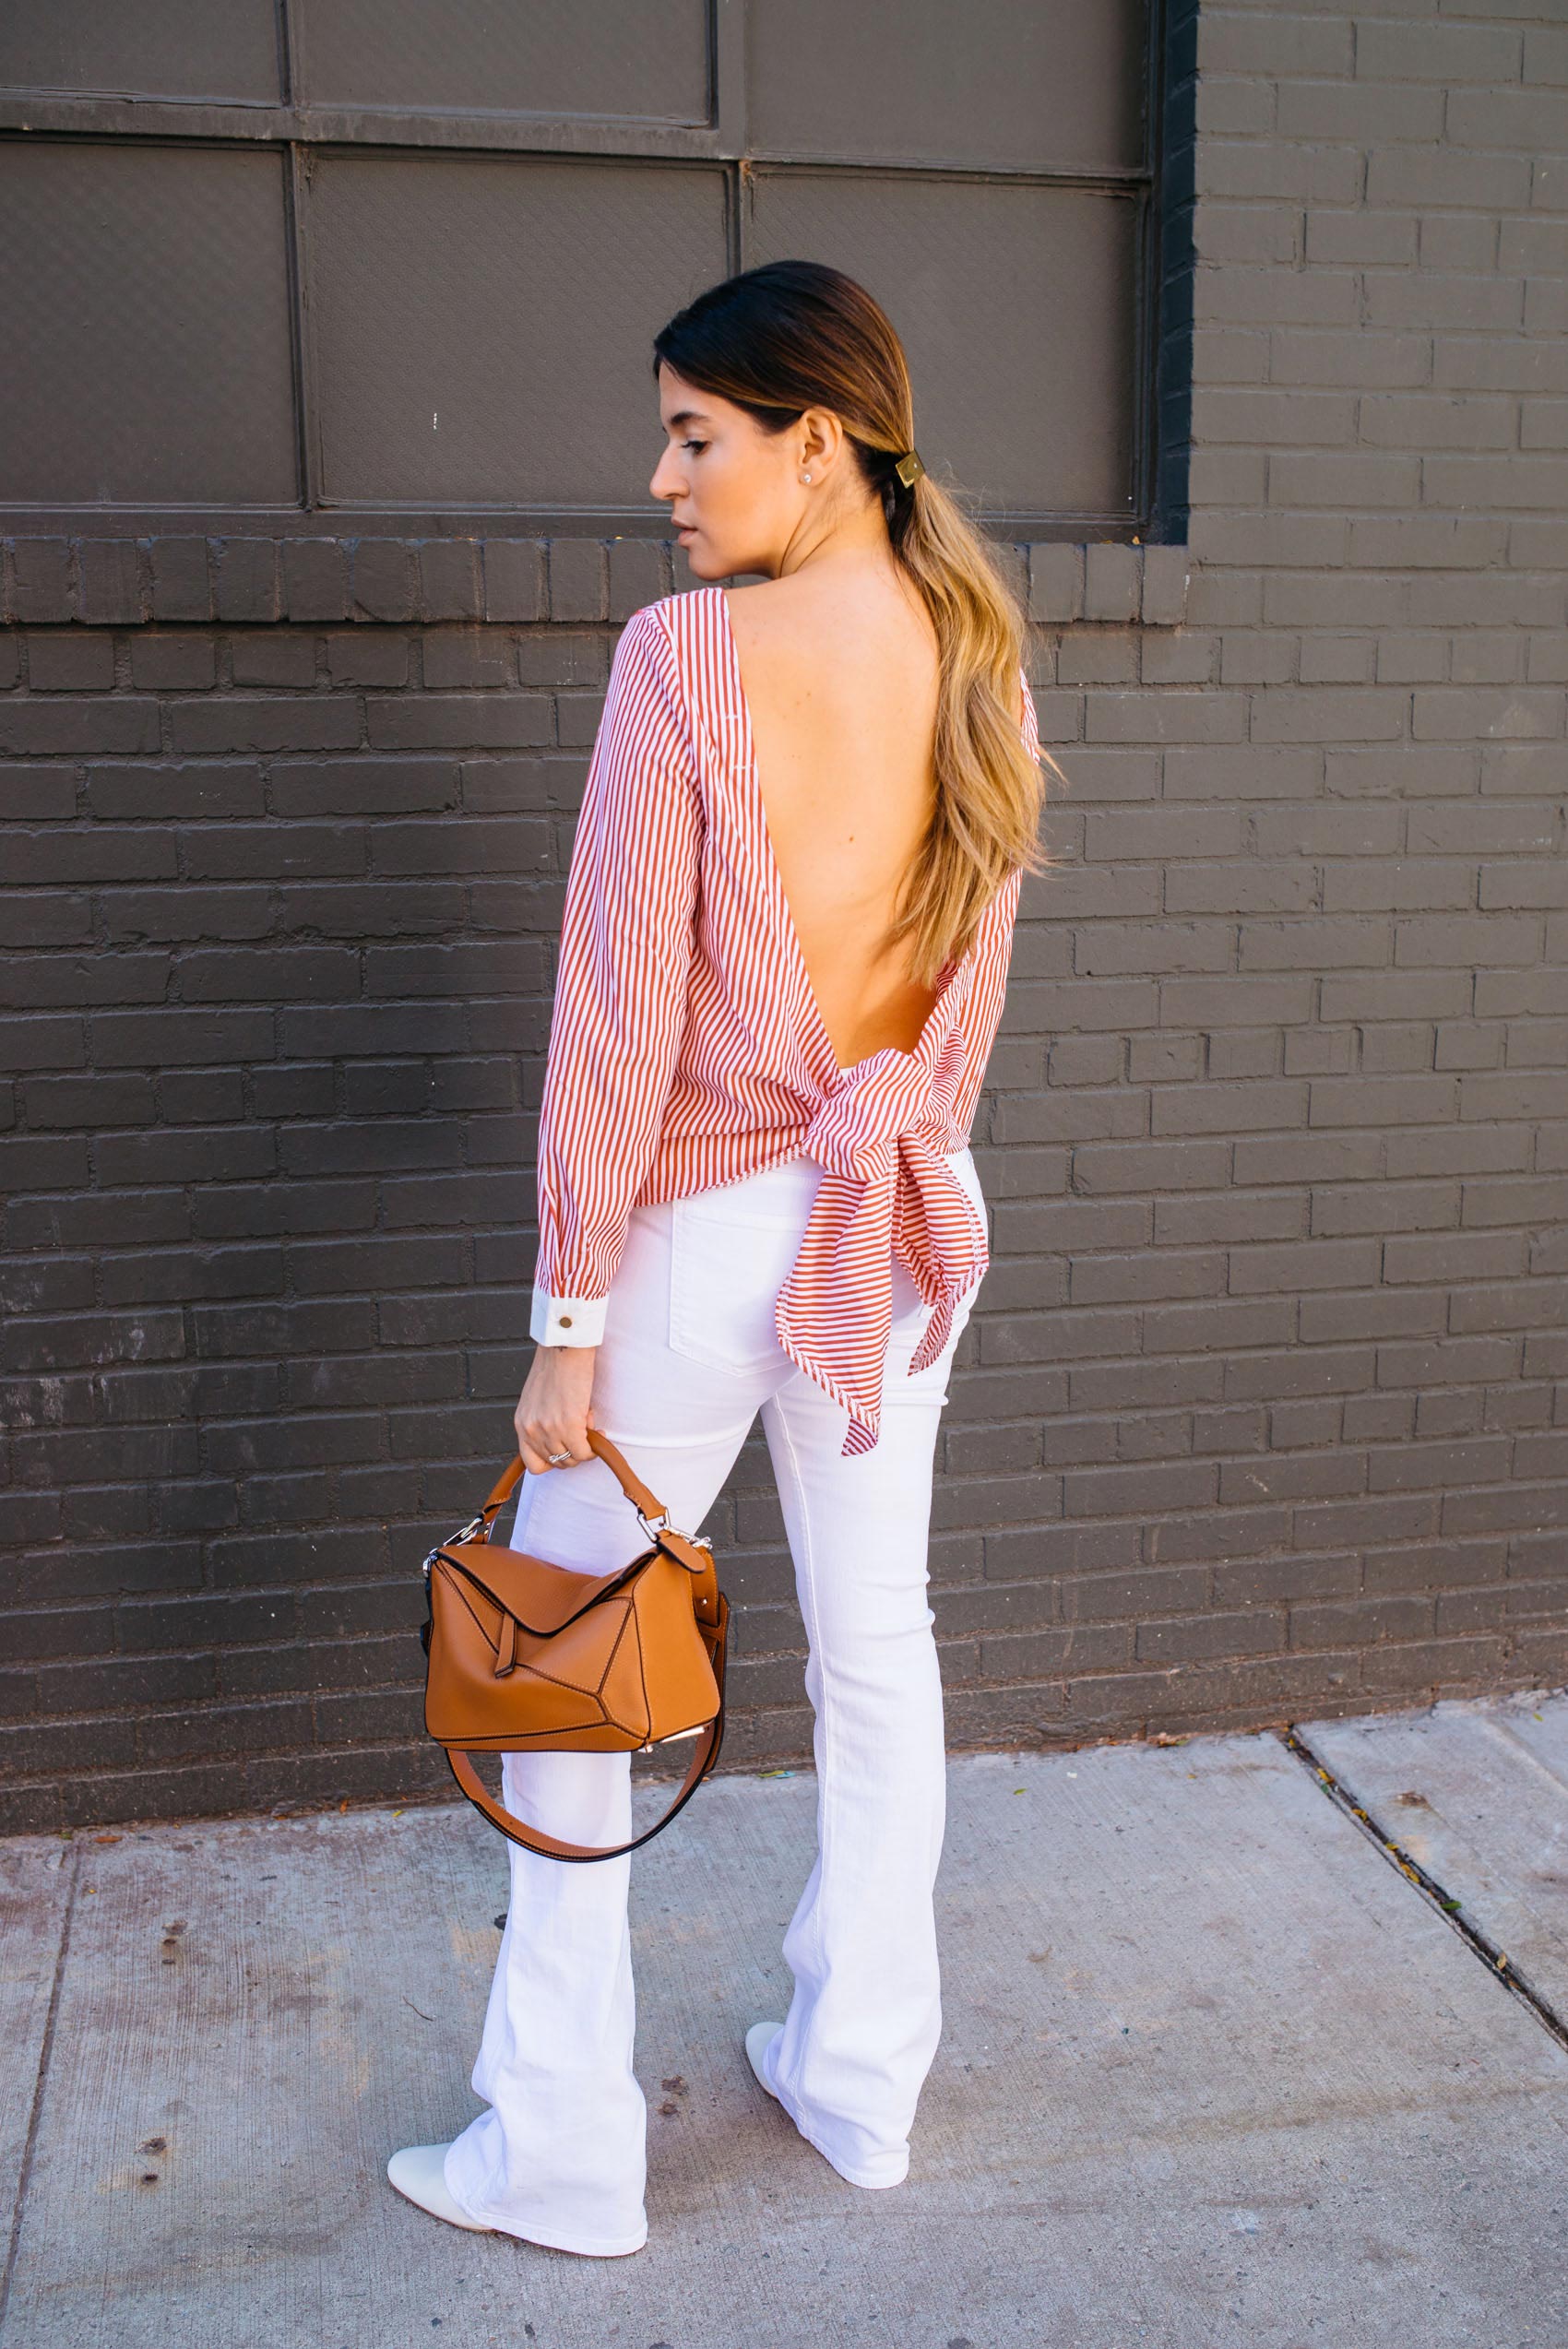 Maristella of A Constellation in a minimal chic and easy Fall outfit idea with an open back blouse and flared white jeans